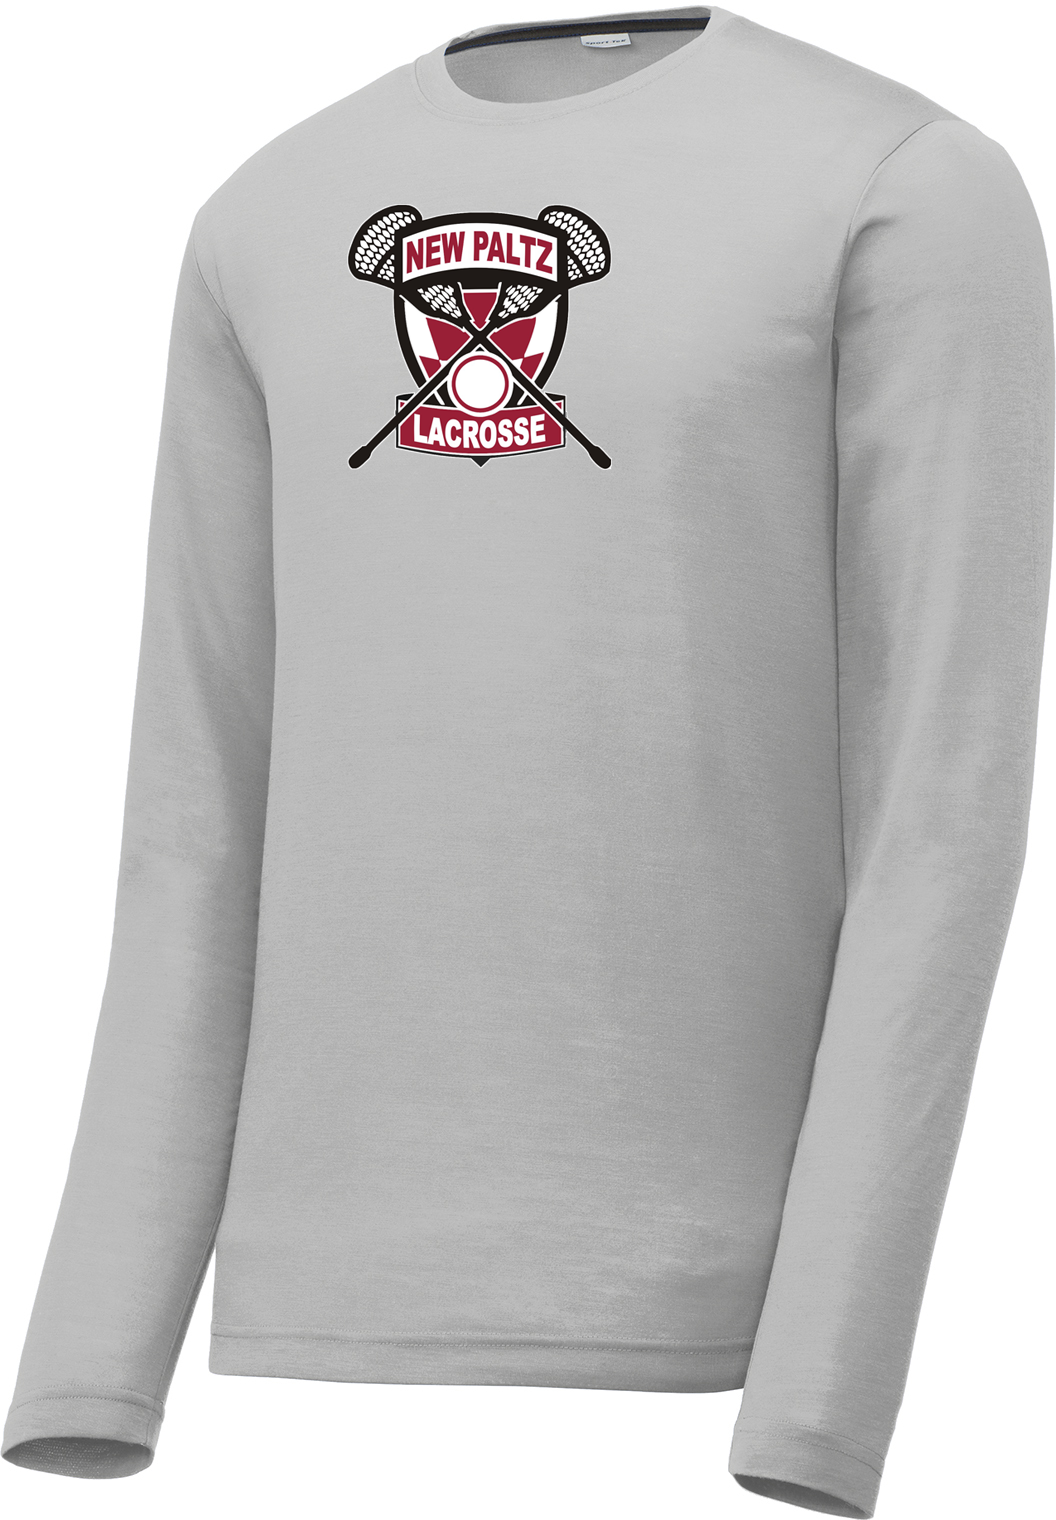 New Paltz Youth Lacrosse Long Sleeve CottonTouch Performance Shirt